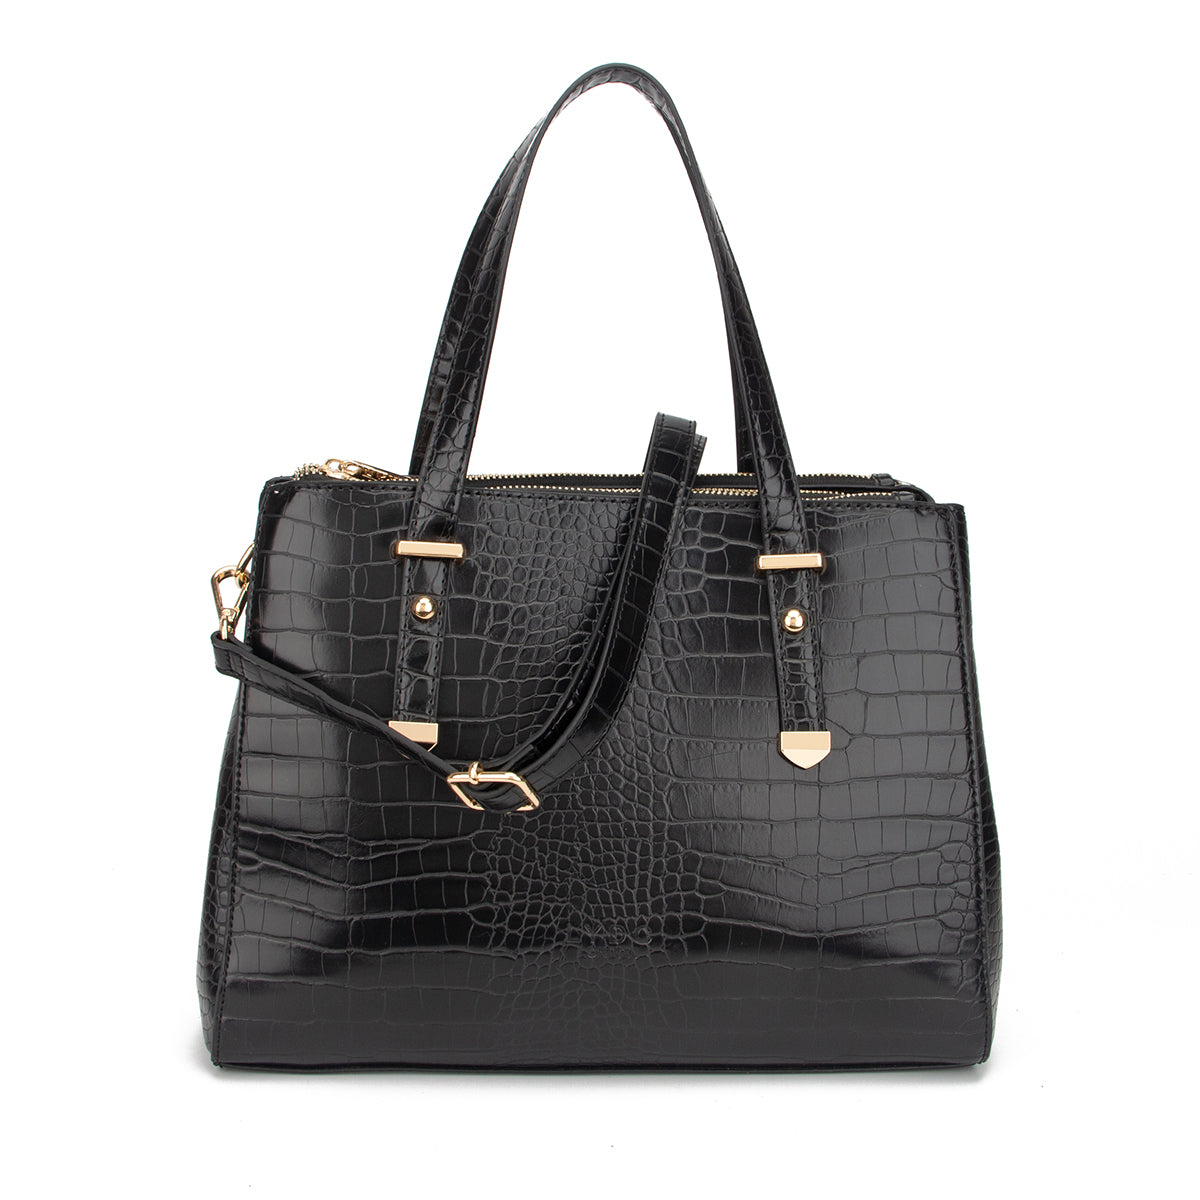 LYDC Large Shoulder Bag Croc Style with Top handles